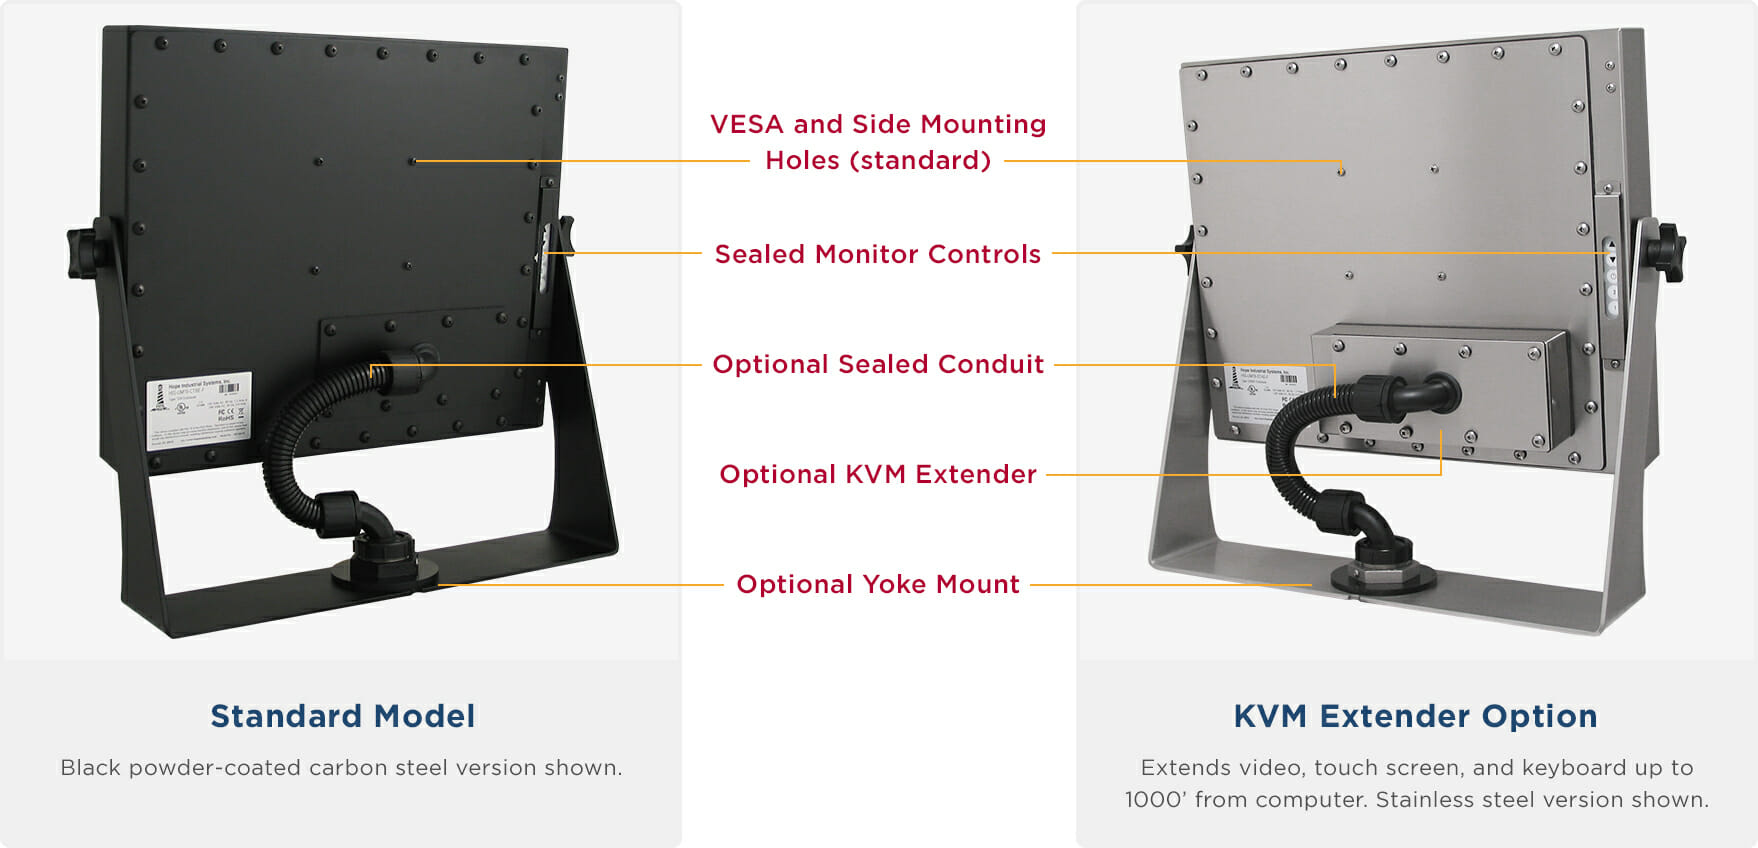 Rear views of NEMA 4/4X Rated 19" Universal Mount Monitors showing Industrial Enclosure features and options